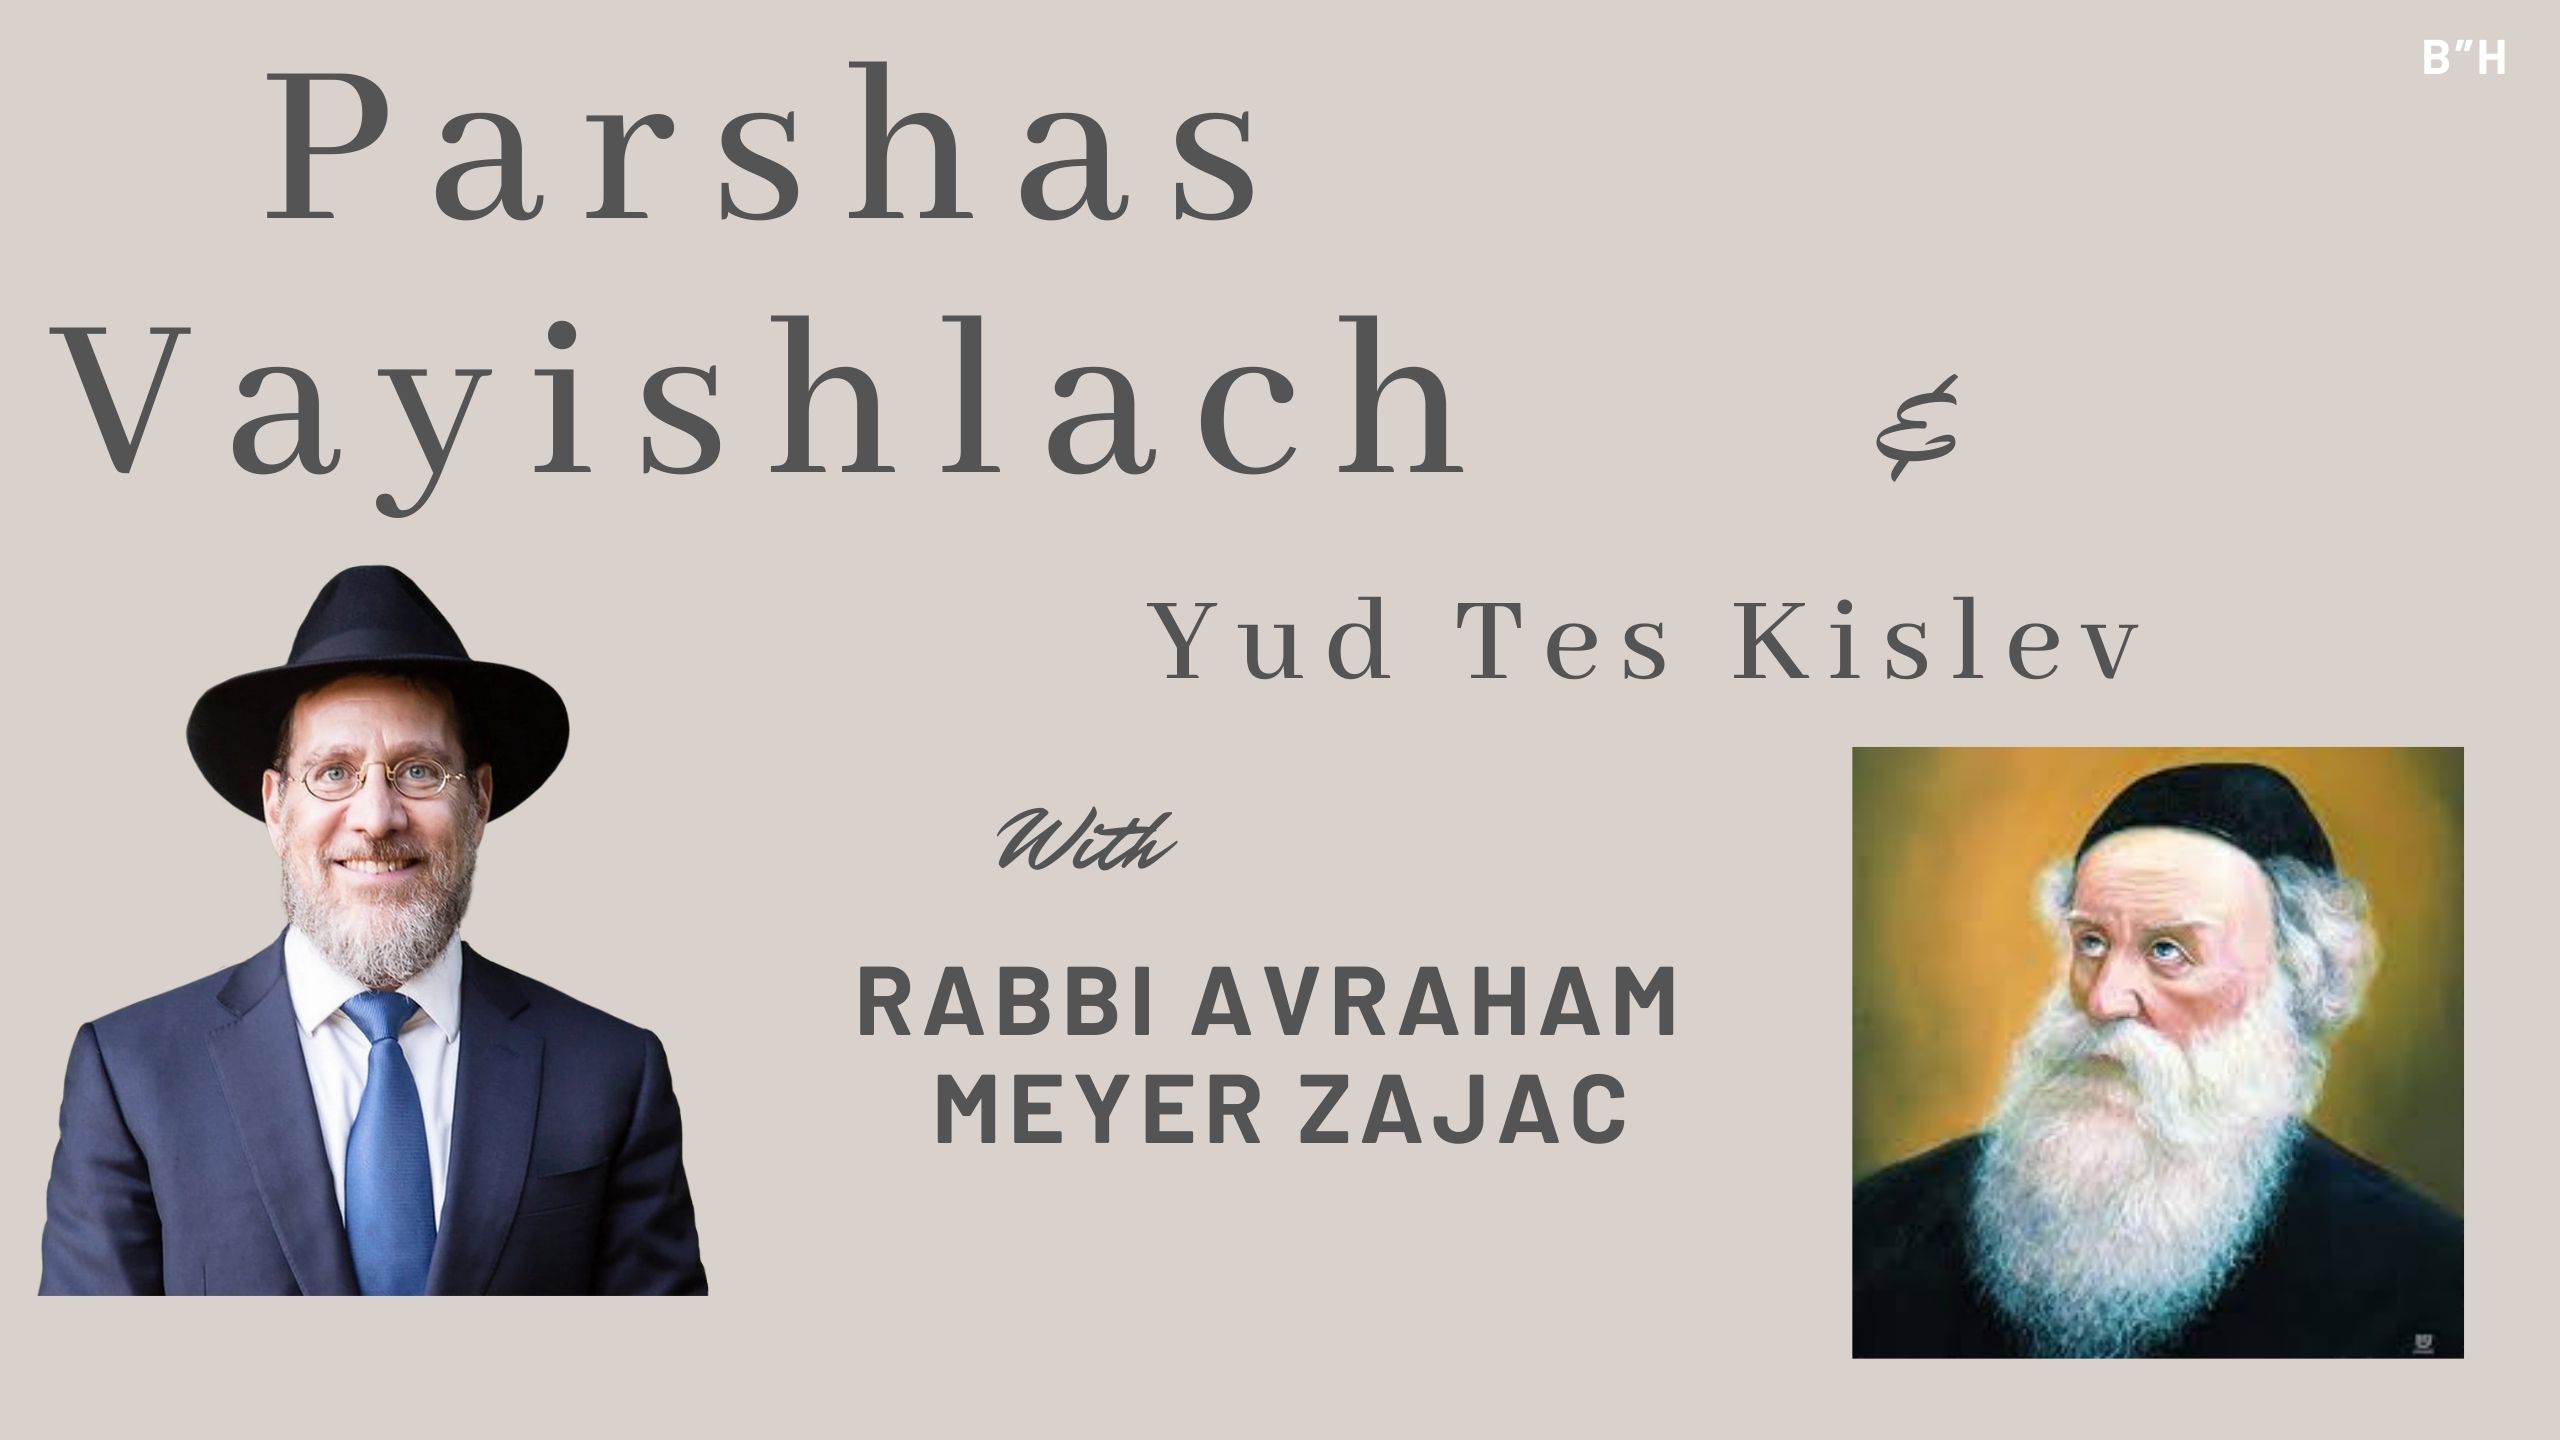 You are currently viewing Parshas Vayishlach – Yud Tes Kislev